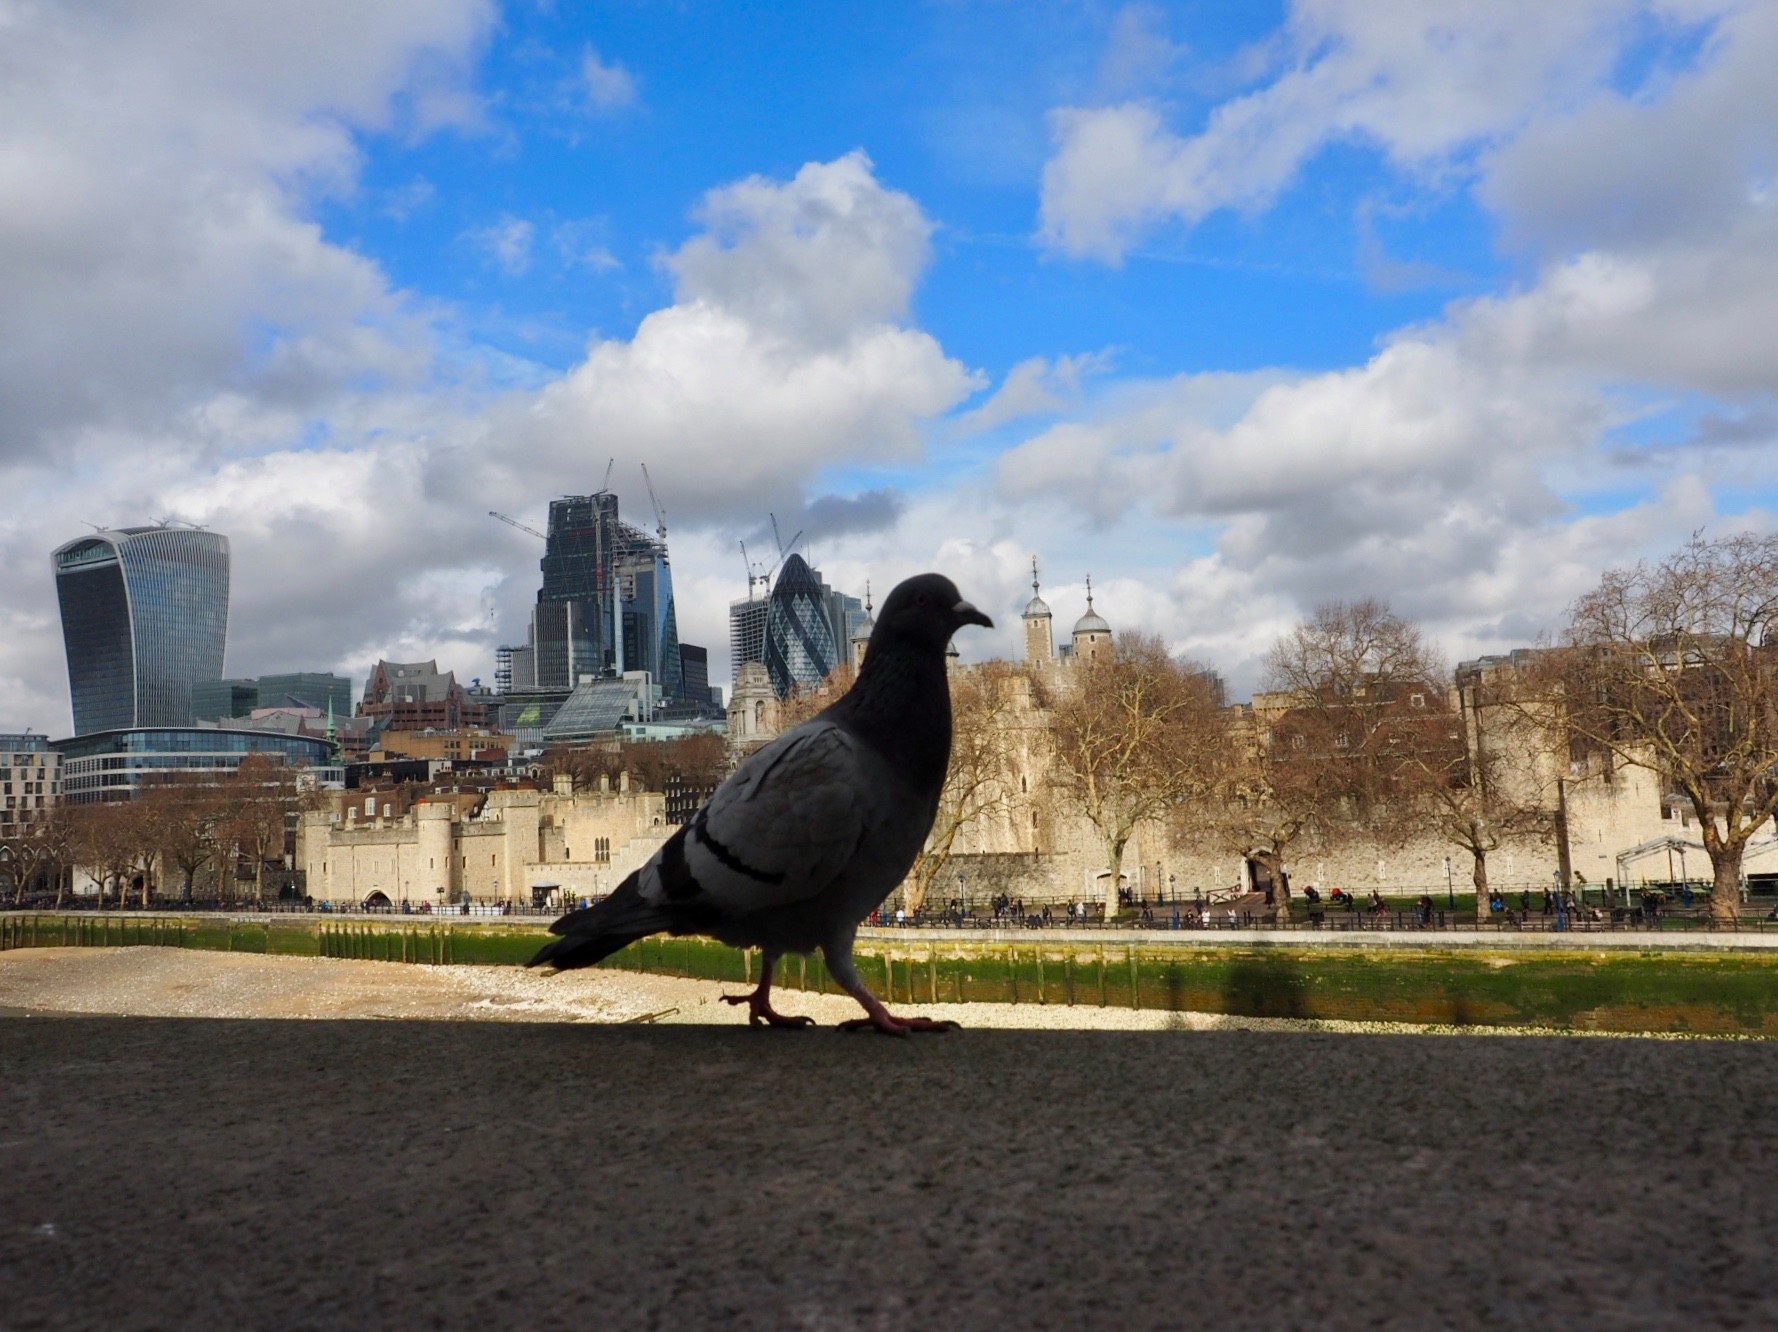 The Tower of London, the City of London, the Bird of London